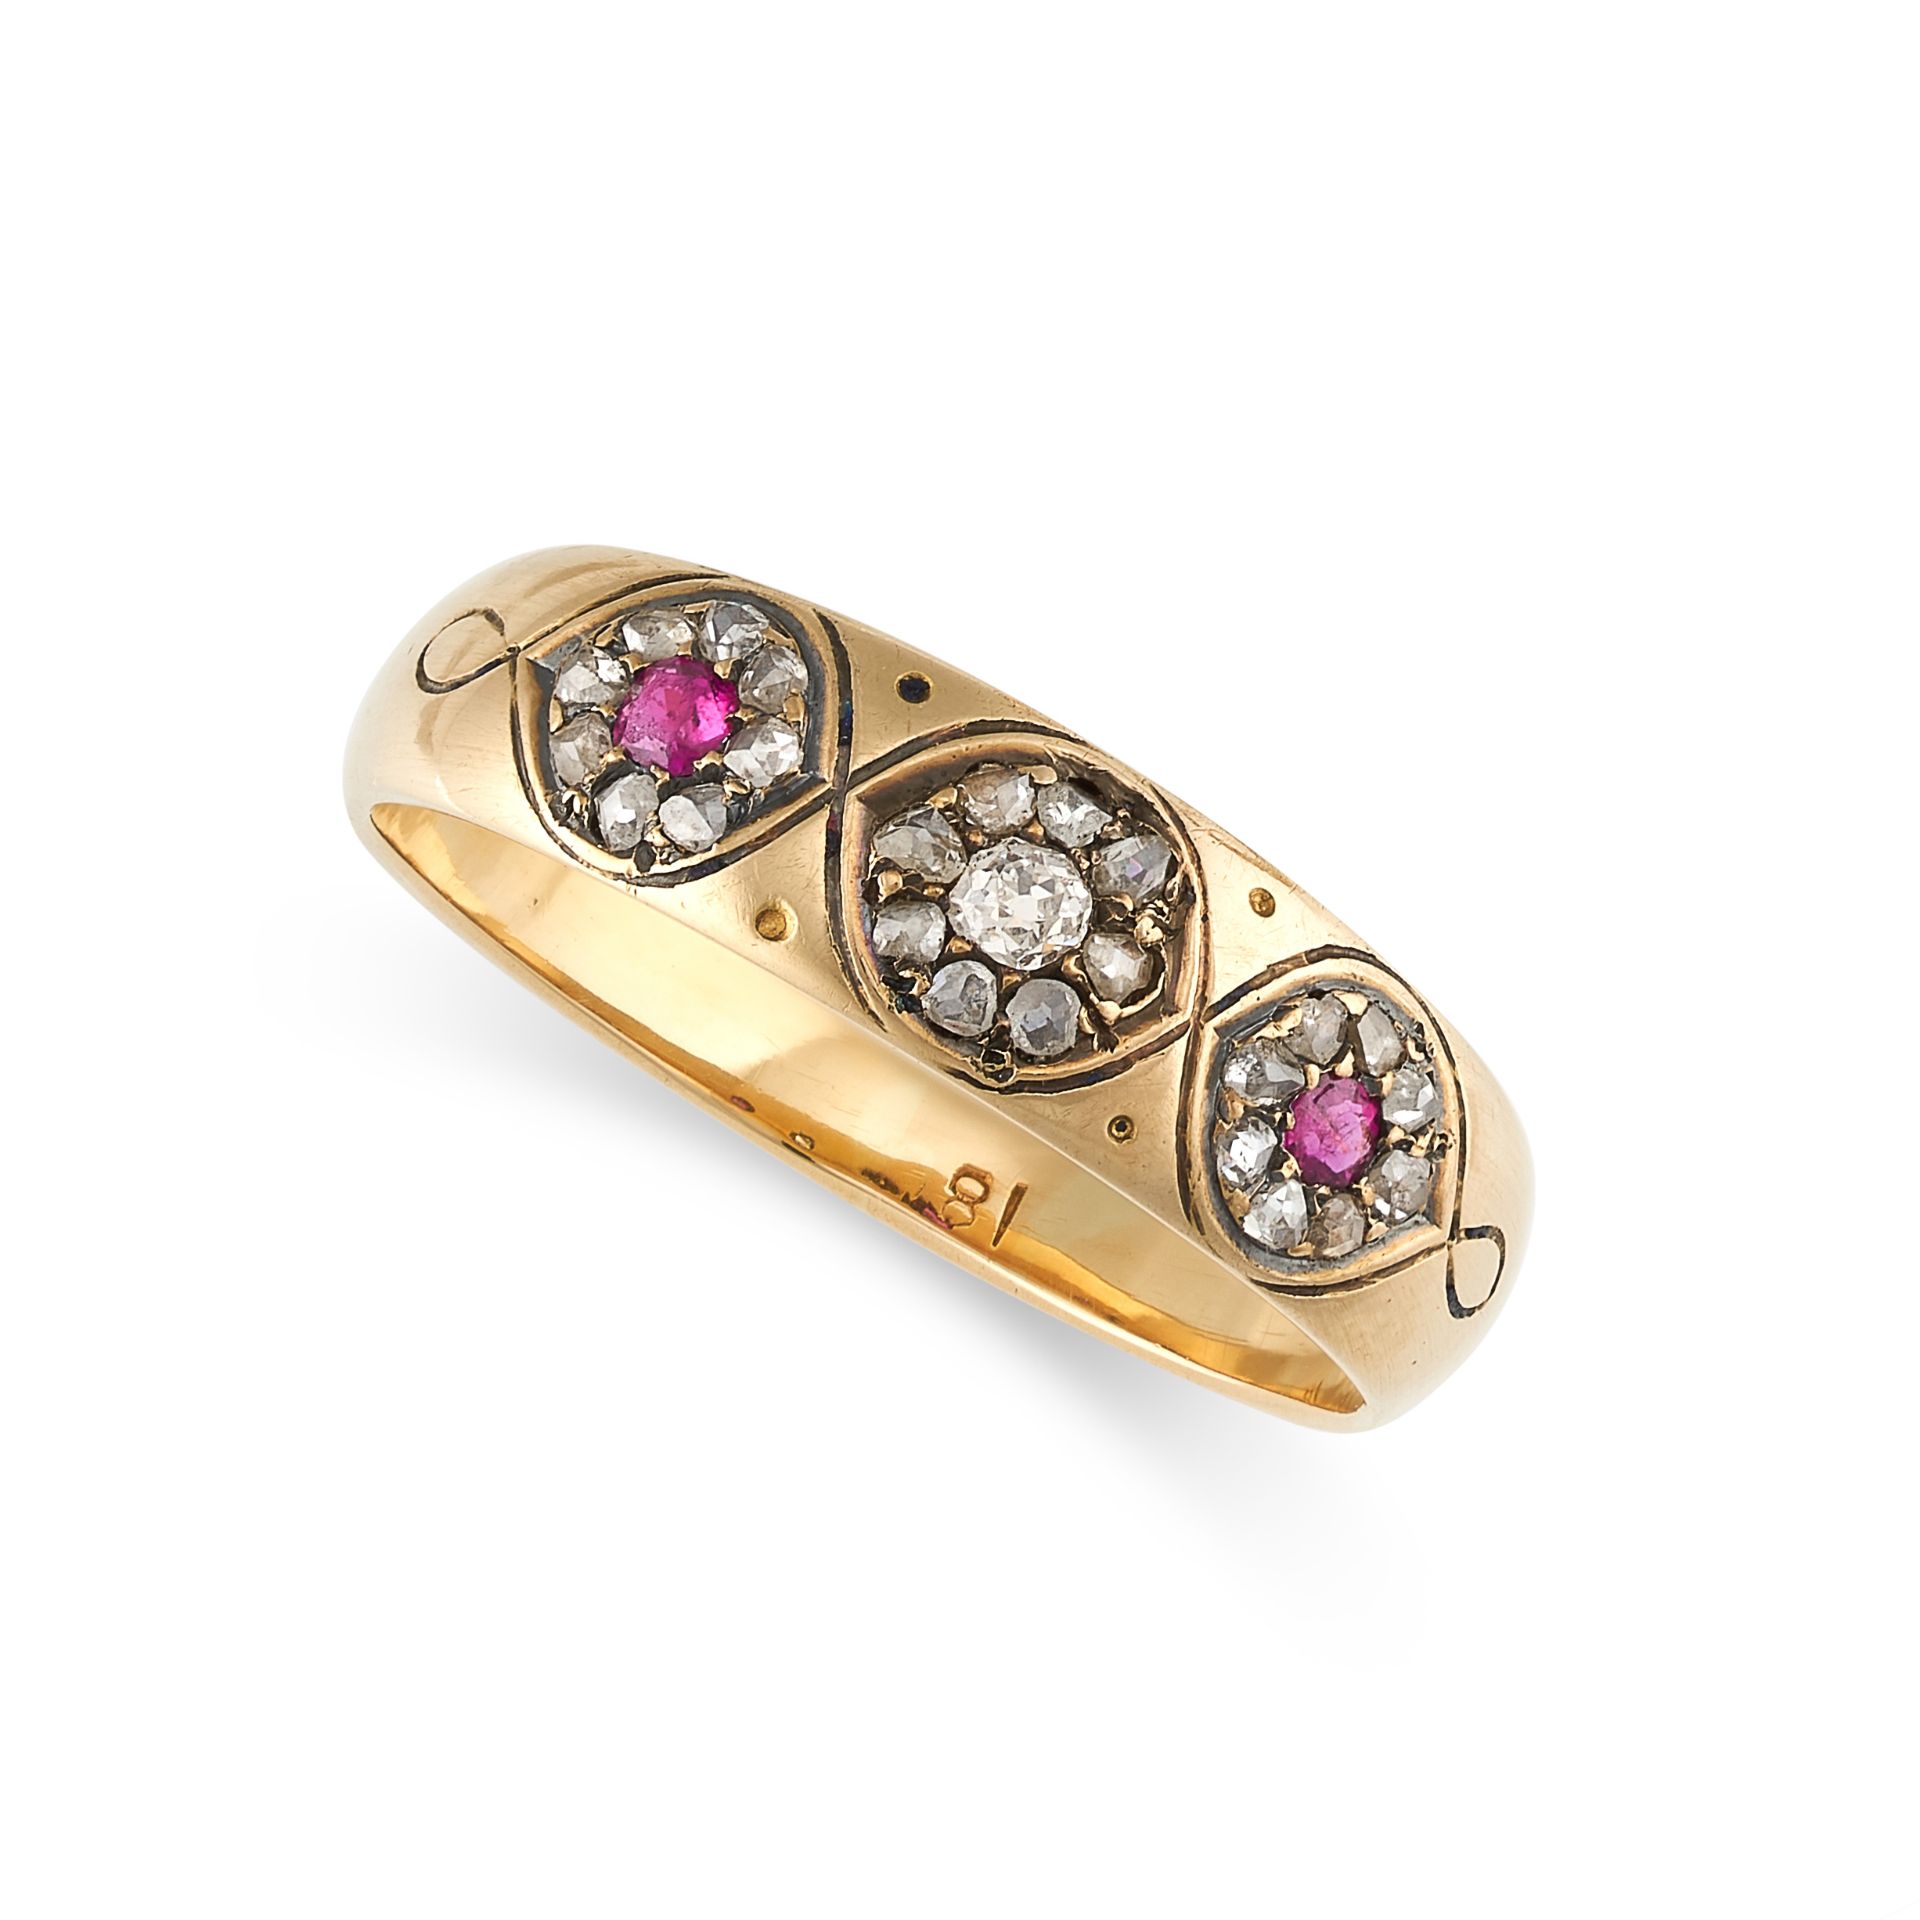 NO RESERVE - A RUBY AND DIAMOND DRESS RING in 18ct yellow gold, the tapering band set with three